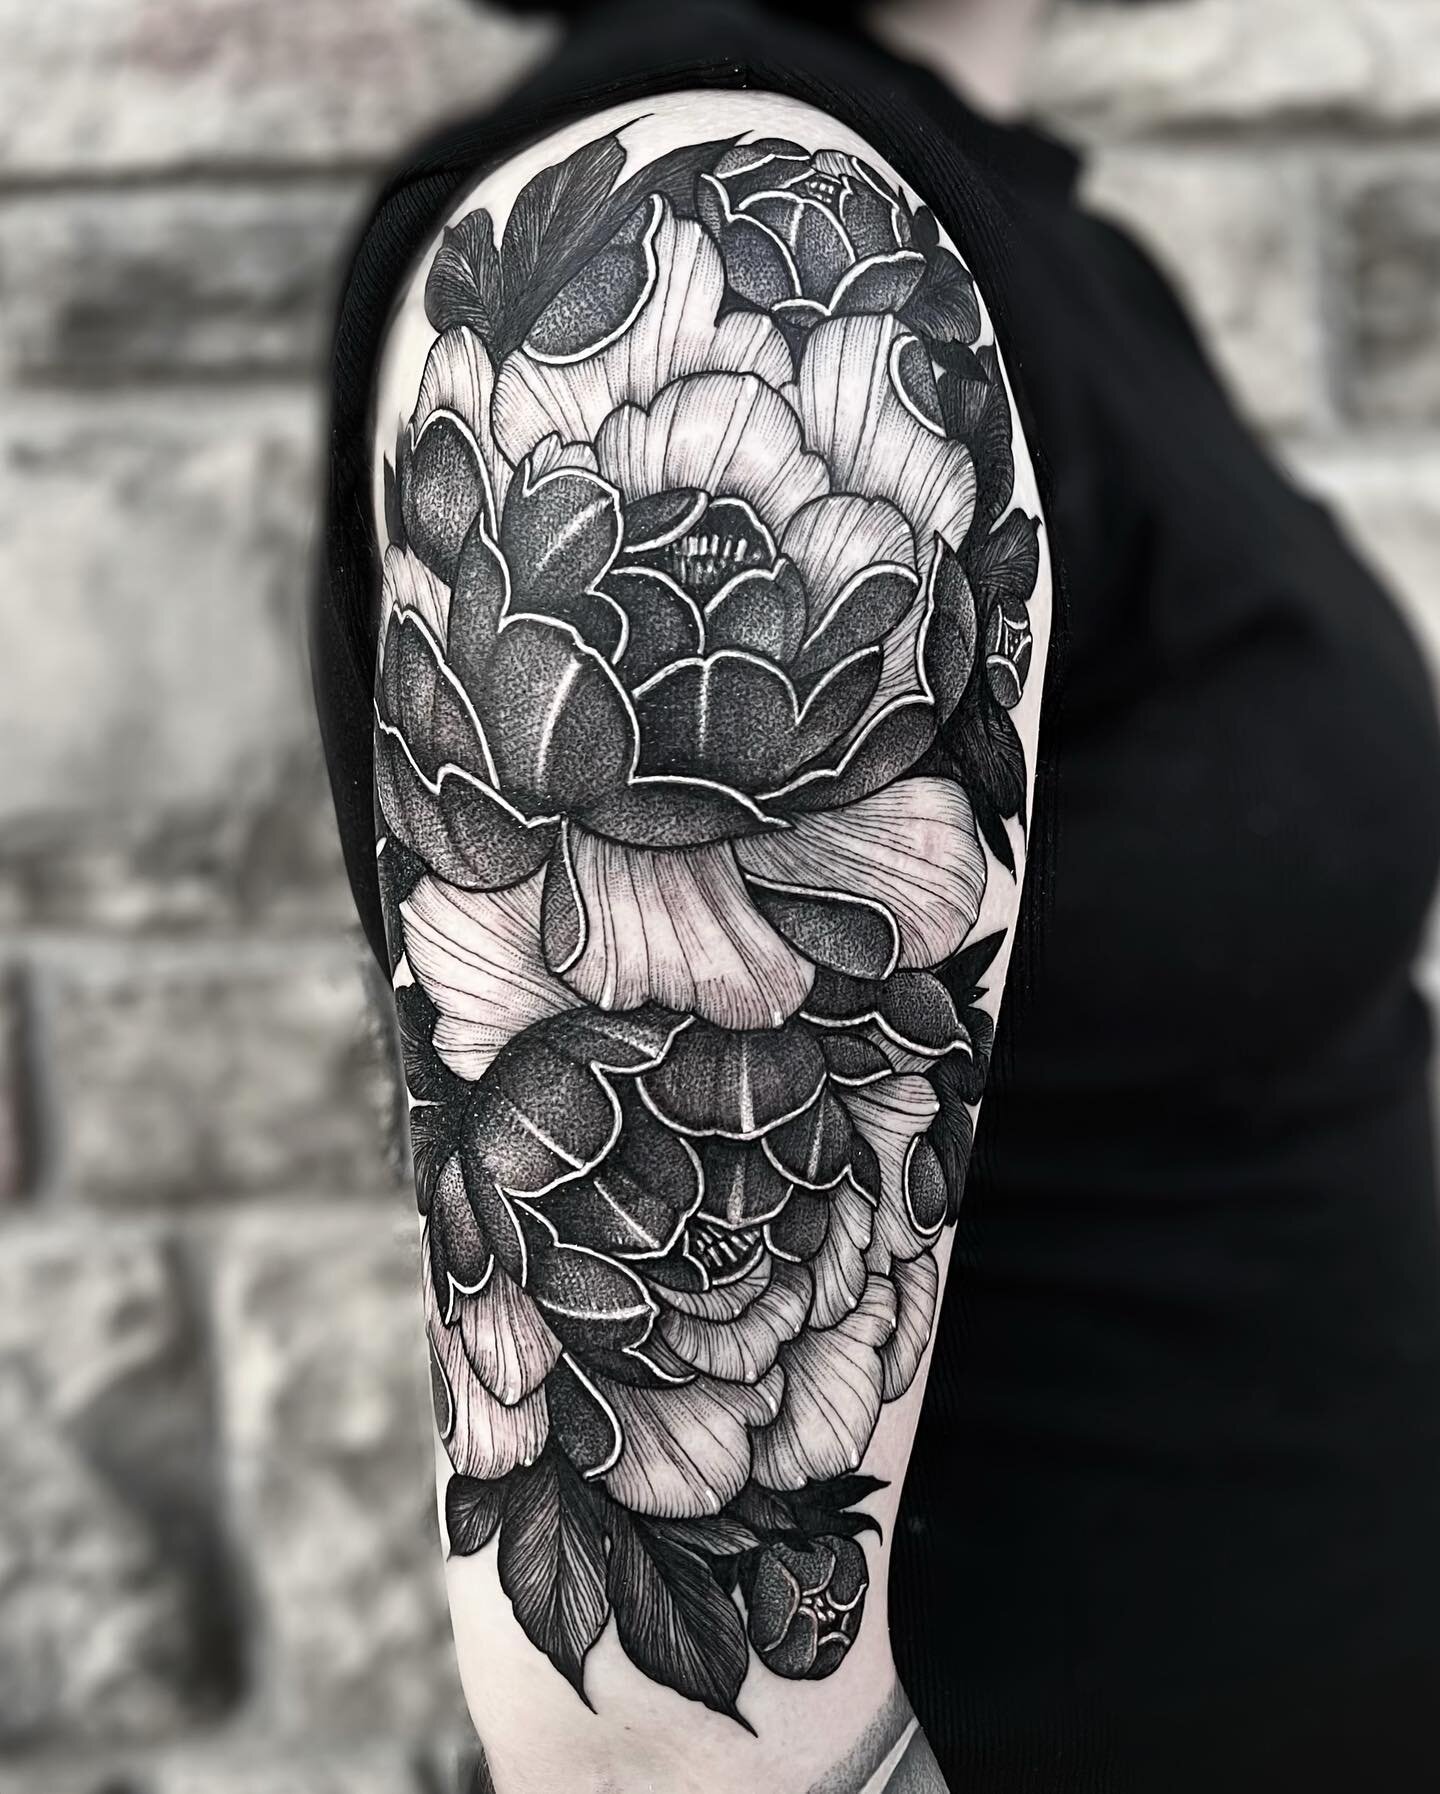 Always trying to play catch-up with posting photos. Here&rsquo;s some flowers from a few weeks ago! 🖤
✖️ Done at @sharktooth_tattoo ✖️
.
.
.
.
@industryinks
@hivecaps 
@empireinks 
@goodguysupply 
.
.
.
.
.
.
.
.
.
.
.
.
.
.
#tattoo #tattoos #tattoo